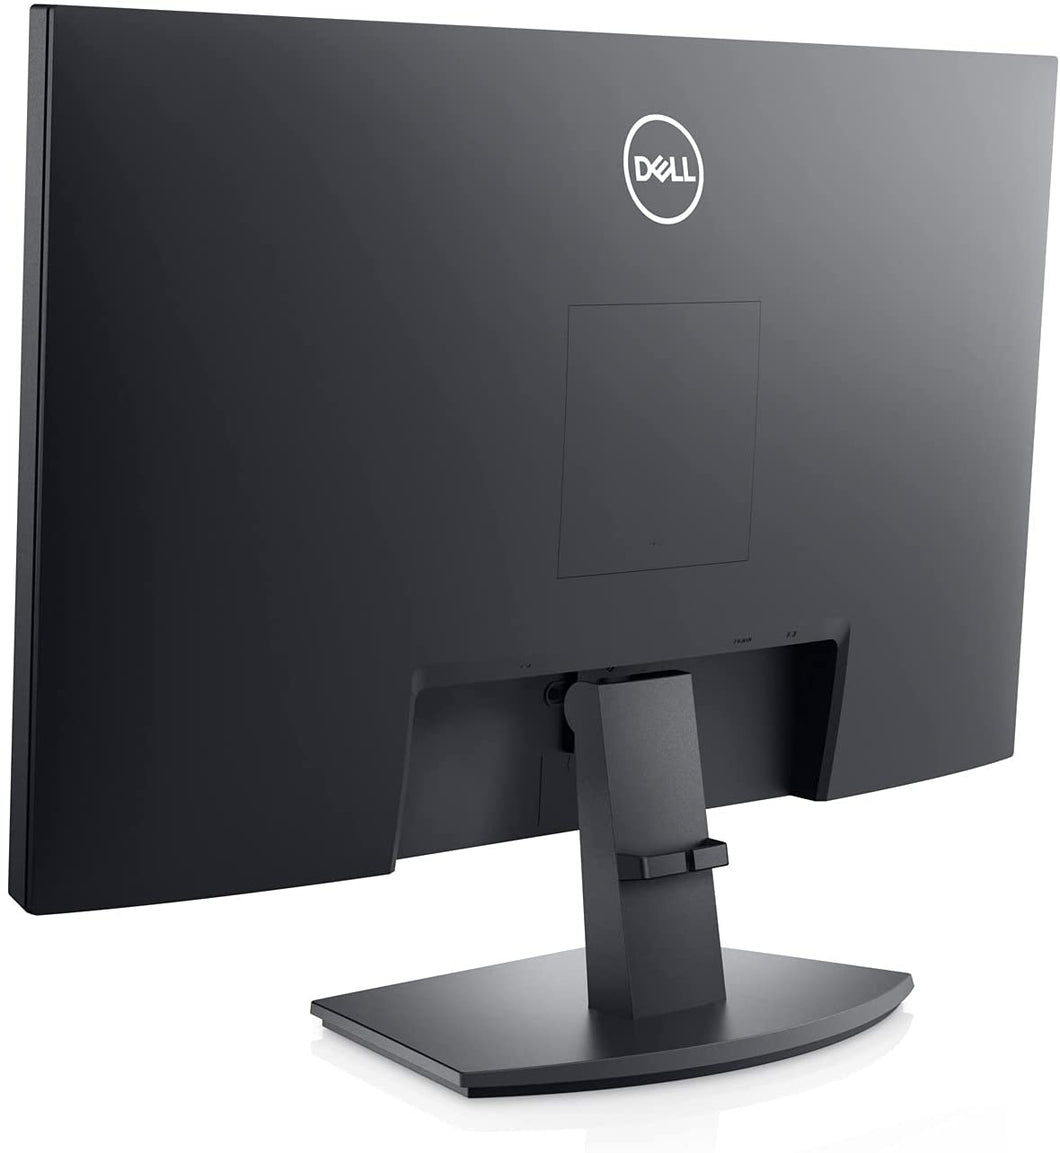 Dell SE2722HX - 27-inch FHD (1920 x 1080) 16:9 Monitor with Comfortview (TUV-Certified), 75Hz Refresh Rate, 16.7 Million Colors, Anti-Glare with 3H Hardness, Black